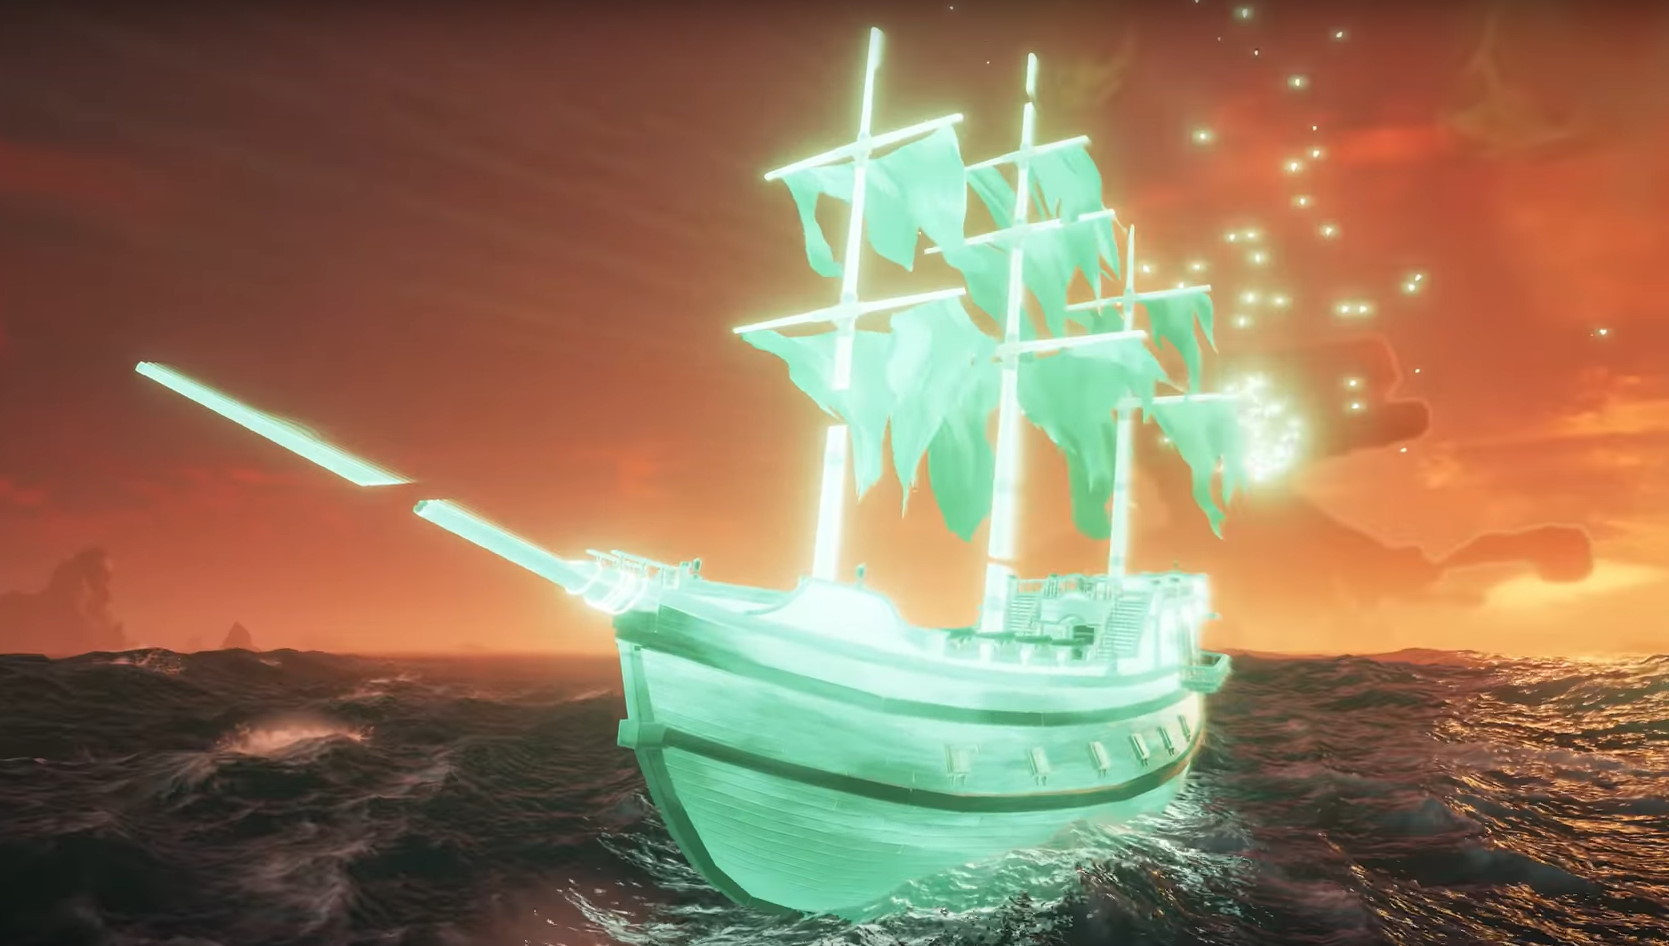 Sea of Thieves is getting ghost ships, gold-plated pets, and a free emote for everyone